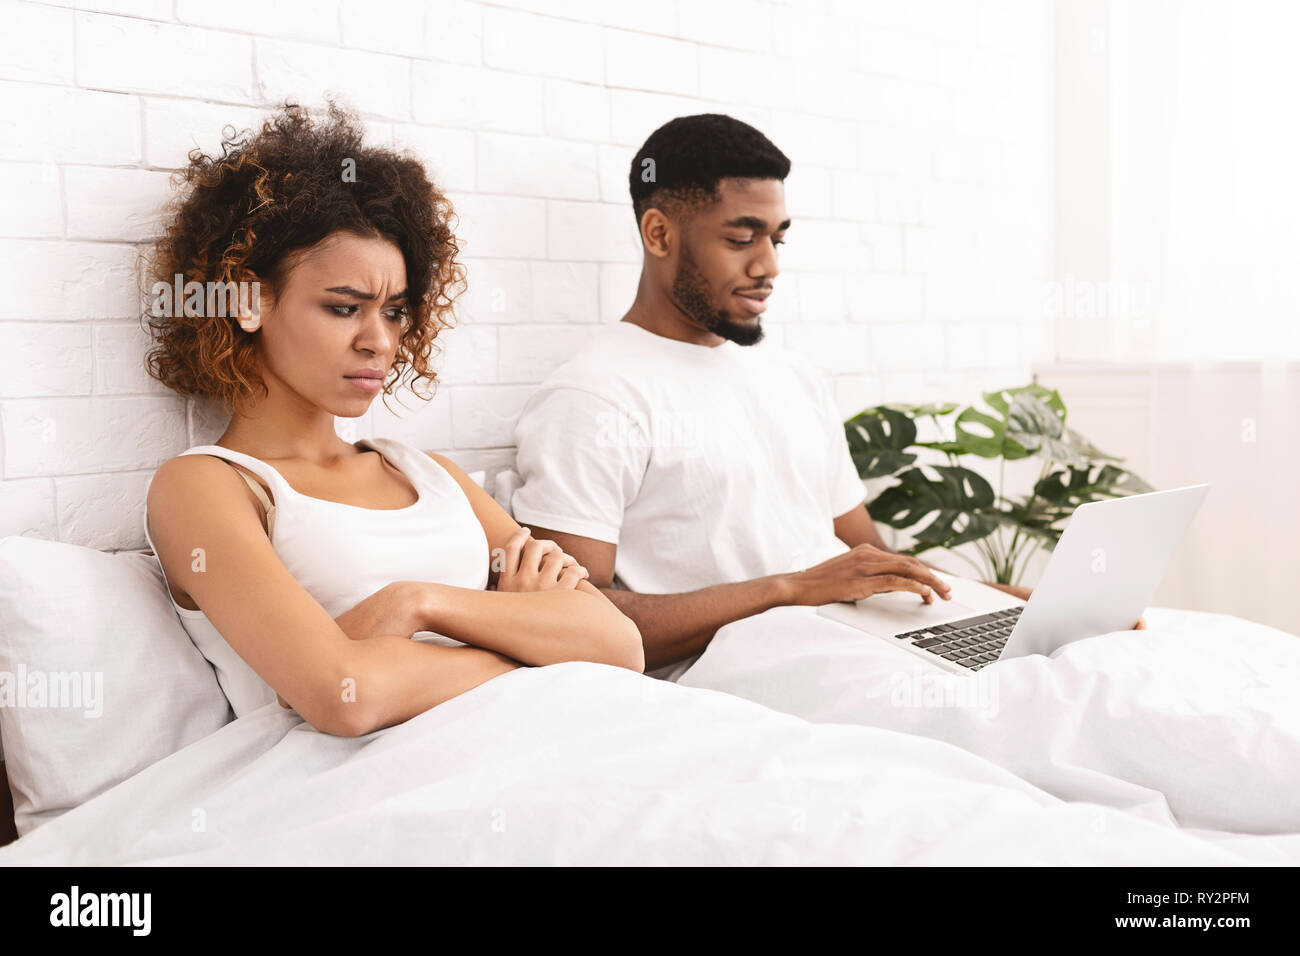 Addicted young man in bed with laptop, woman looking angry Stock Photo